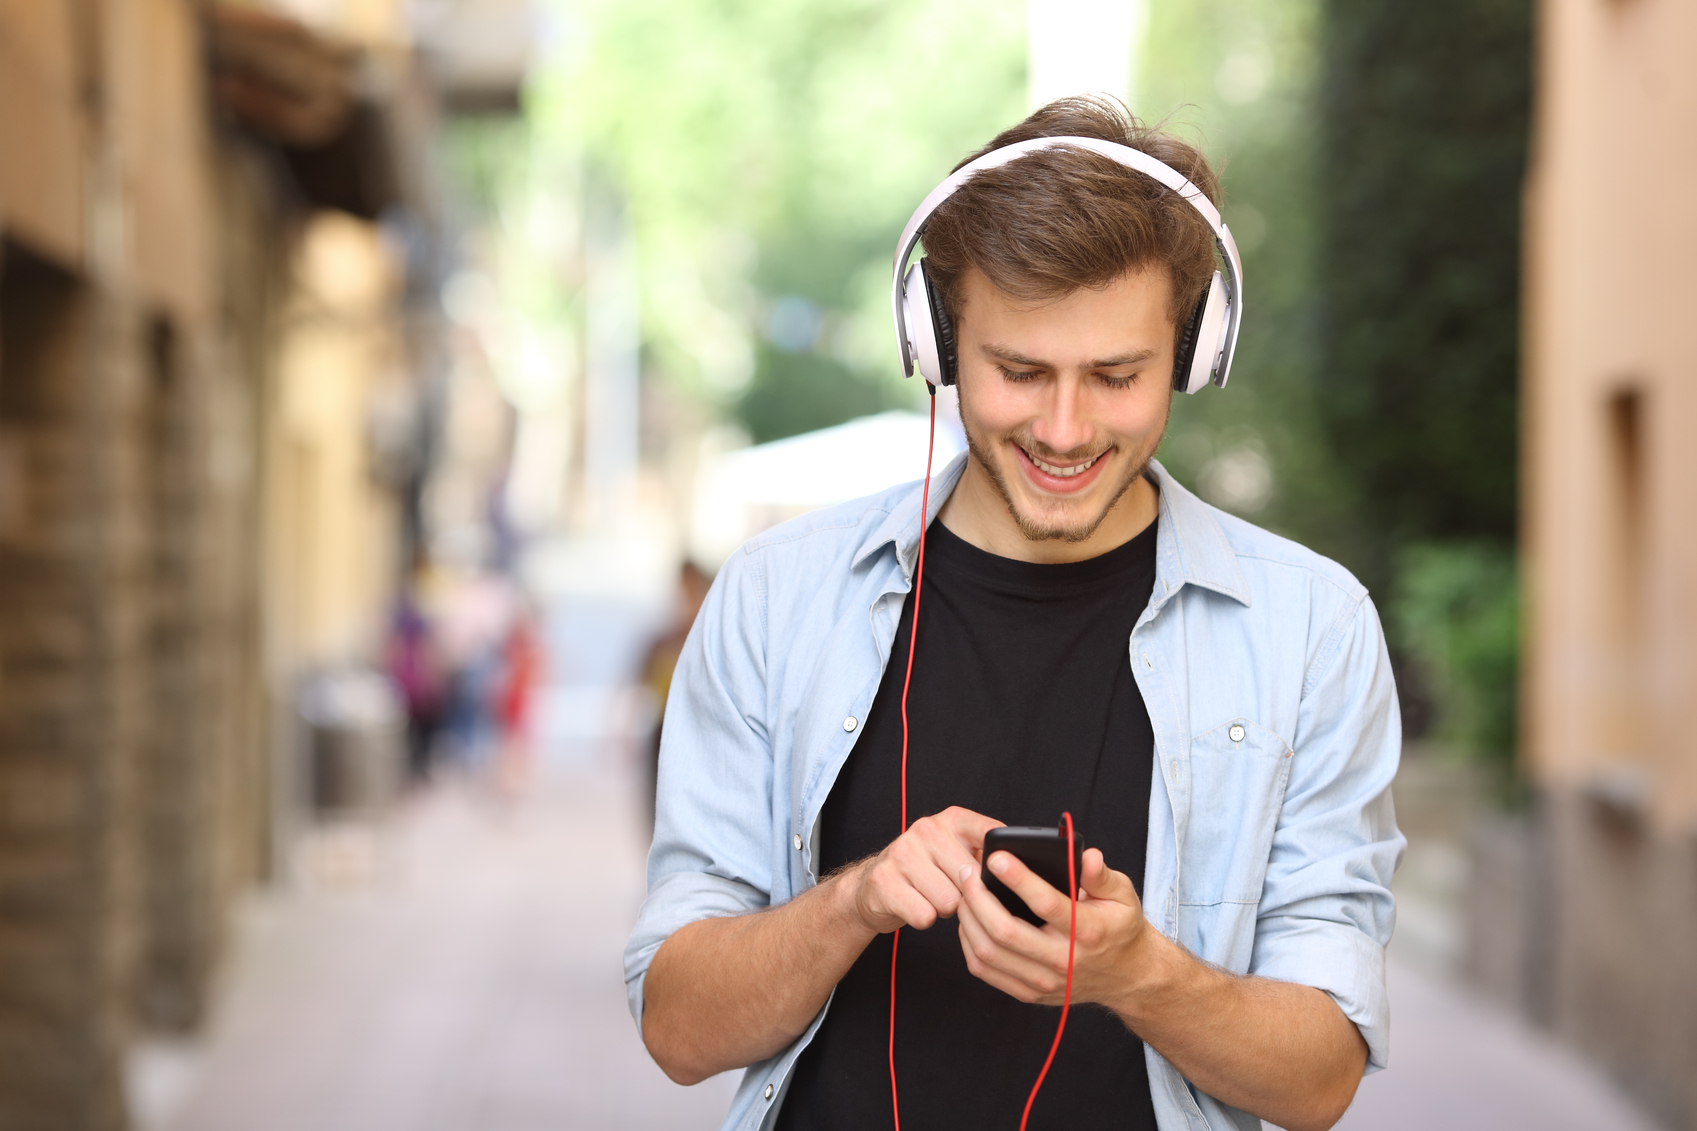 Happy guy walking and using a smart phone to listen music with headphones